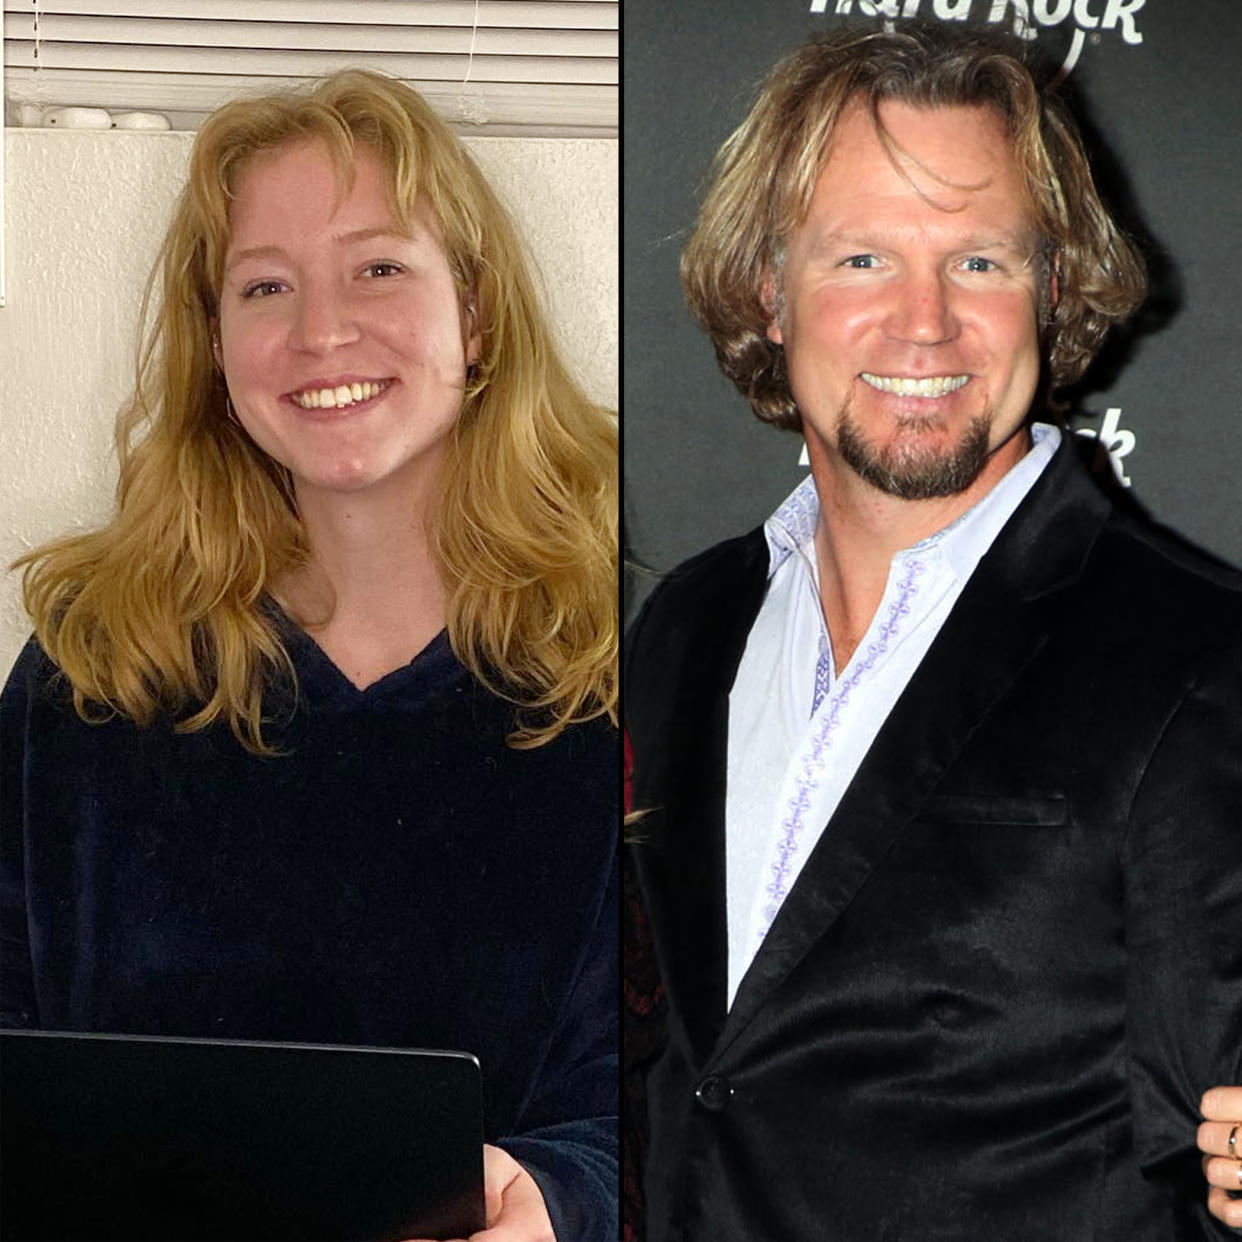 Sister Wives Gwendlyn Brown Claims Police Once Threatened to Arrest Father Kody Brown While Living in Utah